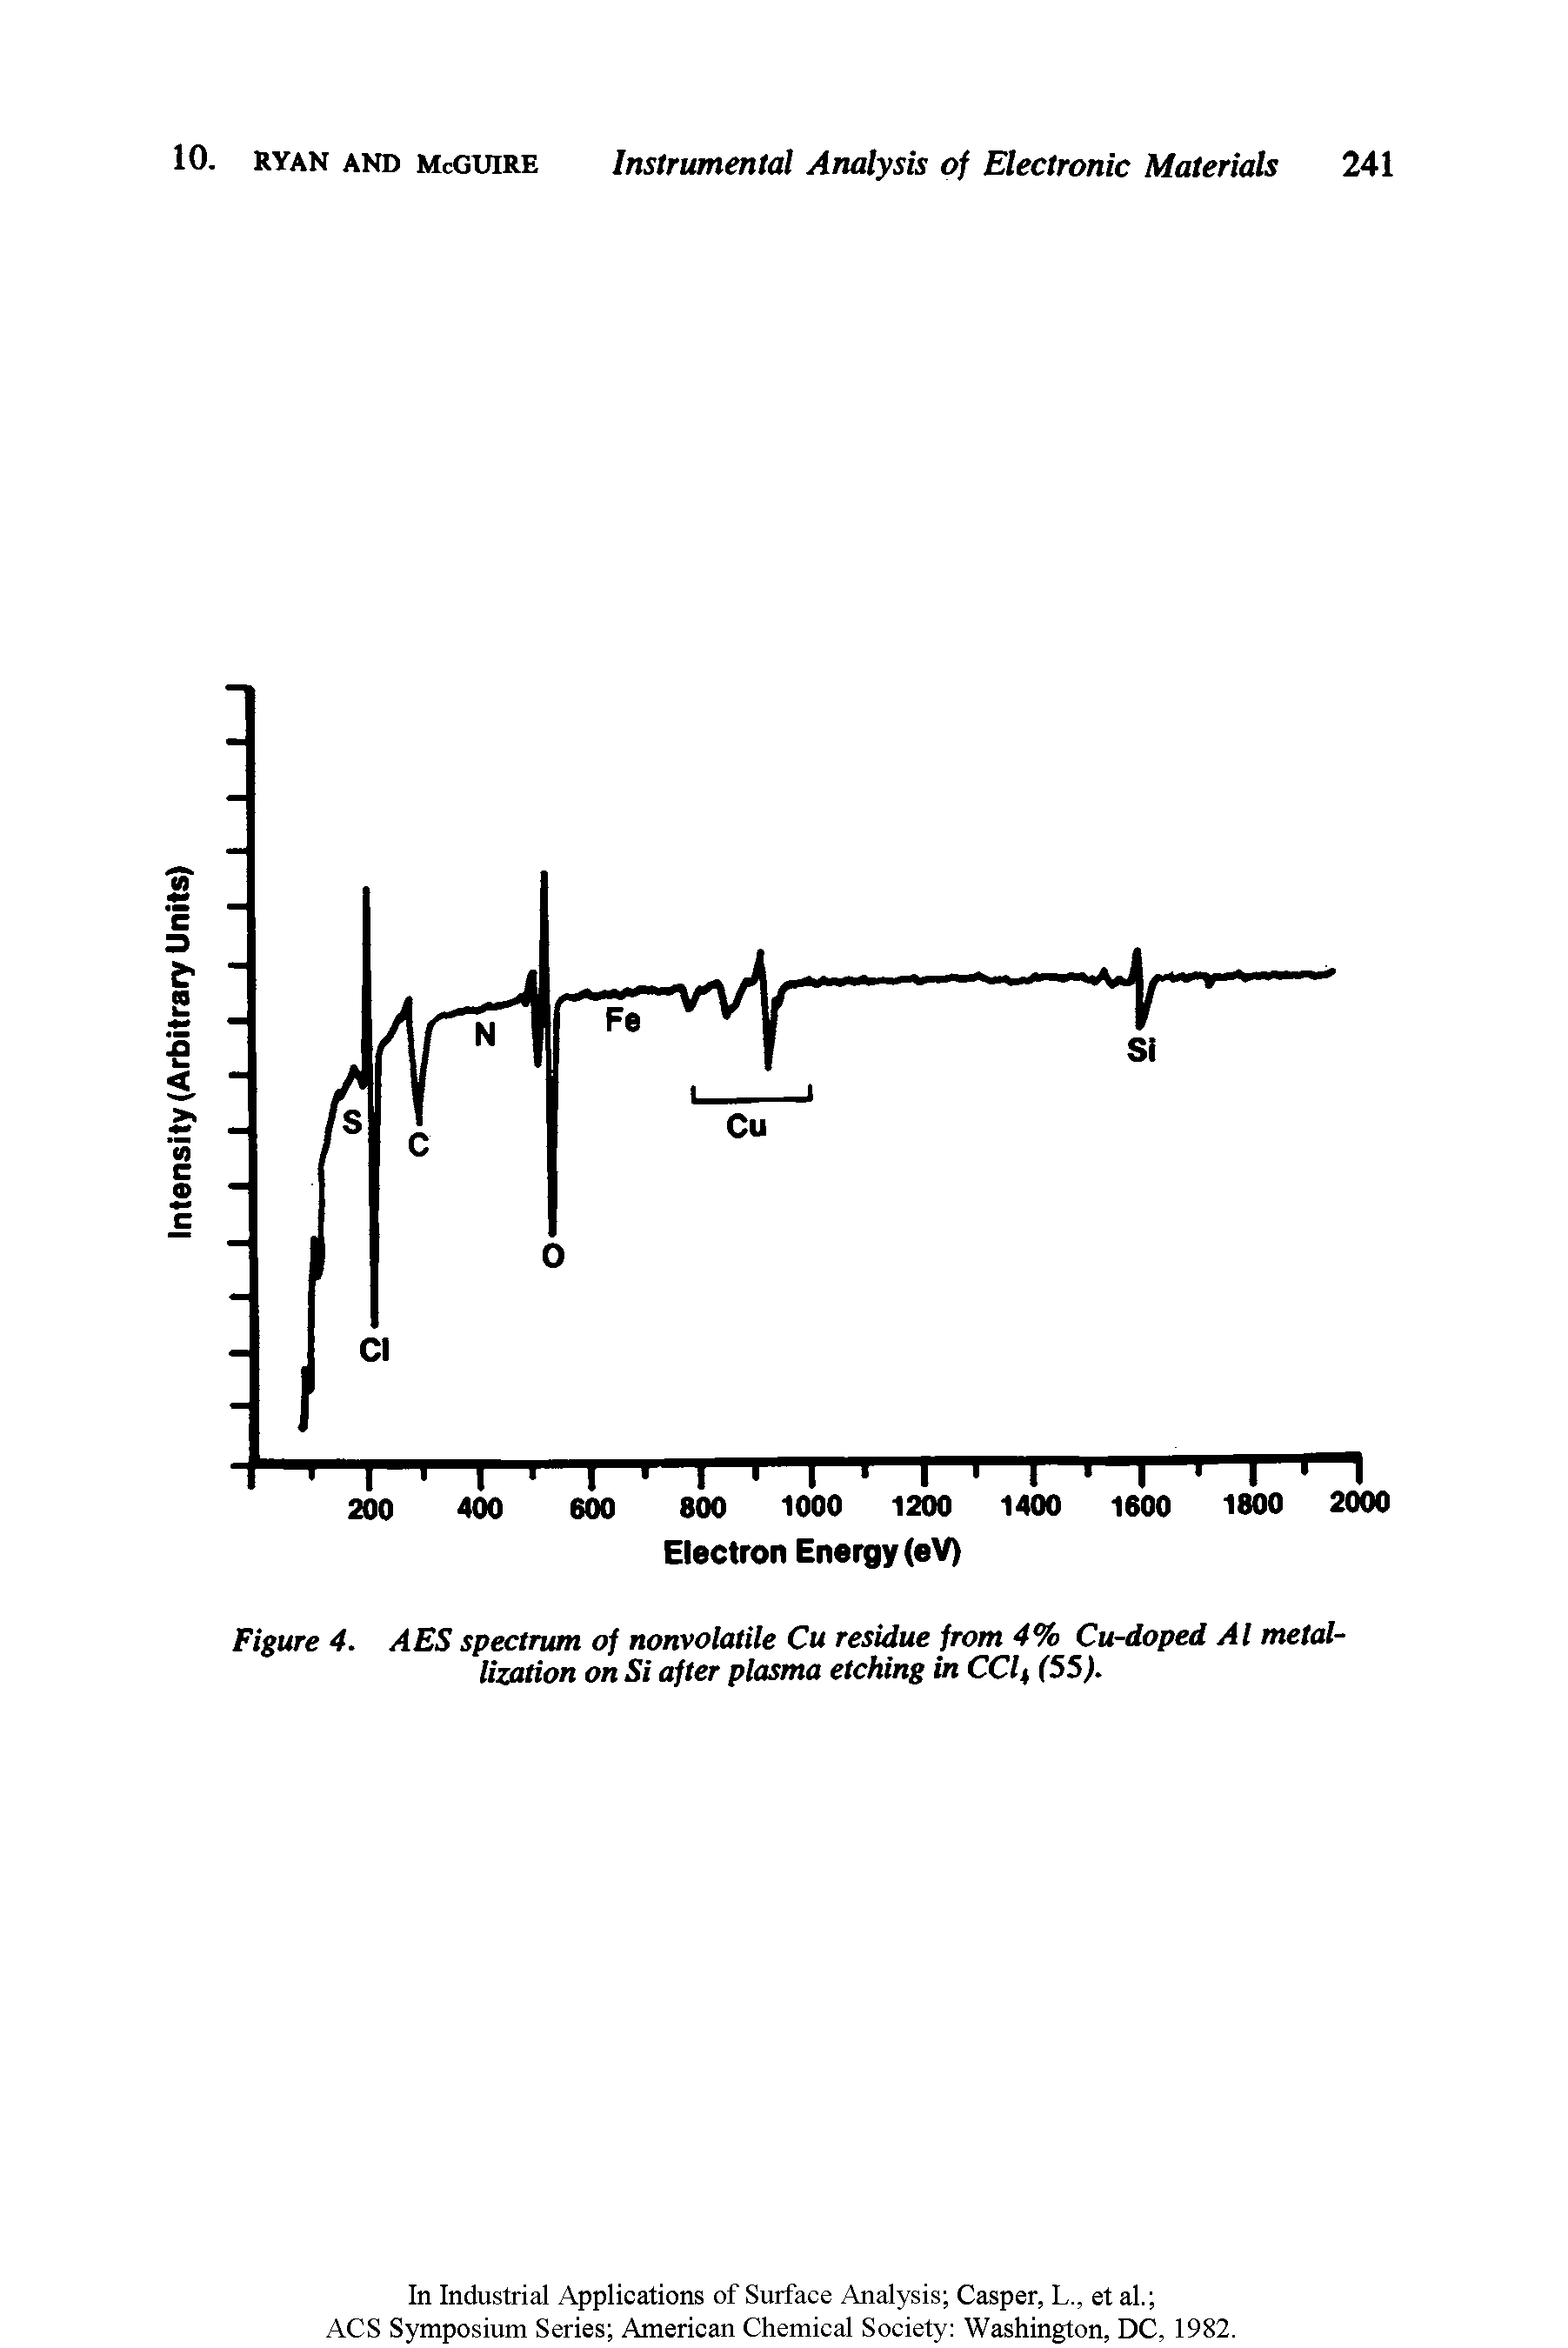 Figure 4. AES spectrum of nonvolatile Cu residue from 4% Cu-doped A l metallization on Si after plasma etching in CClt (55).